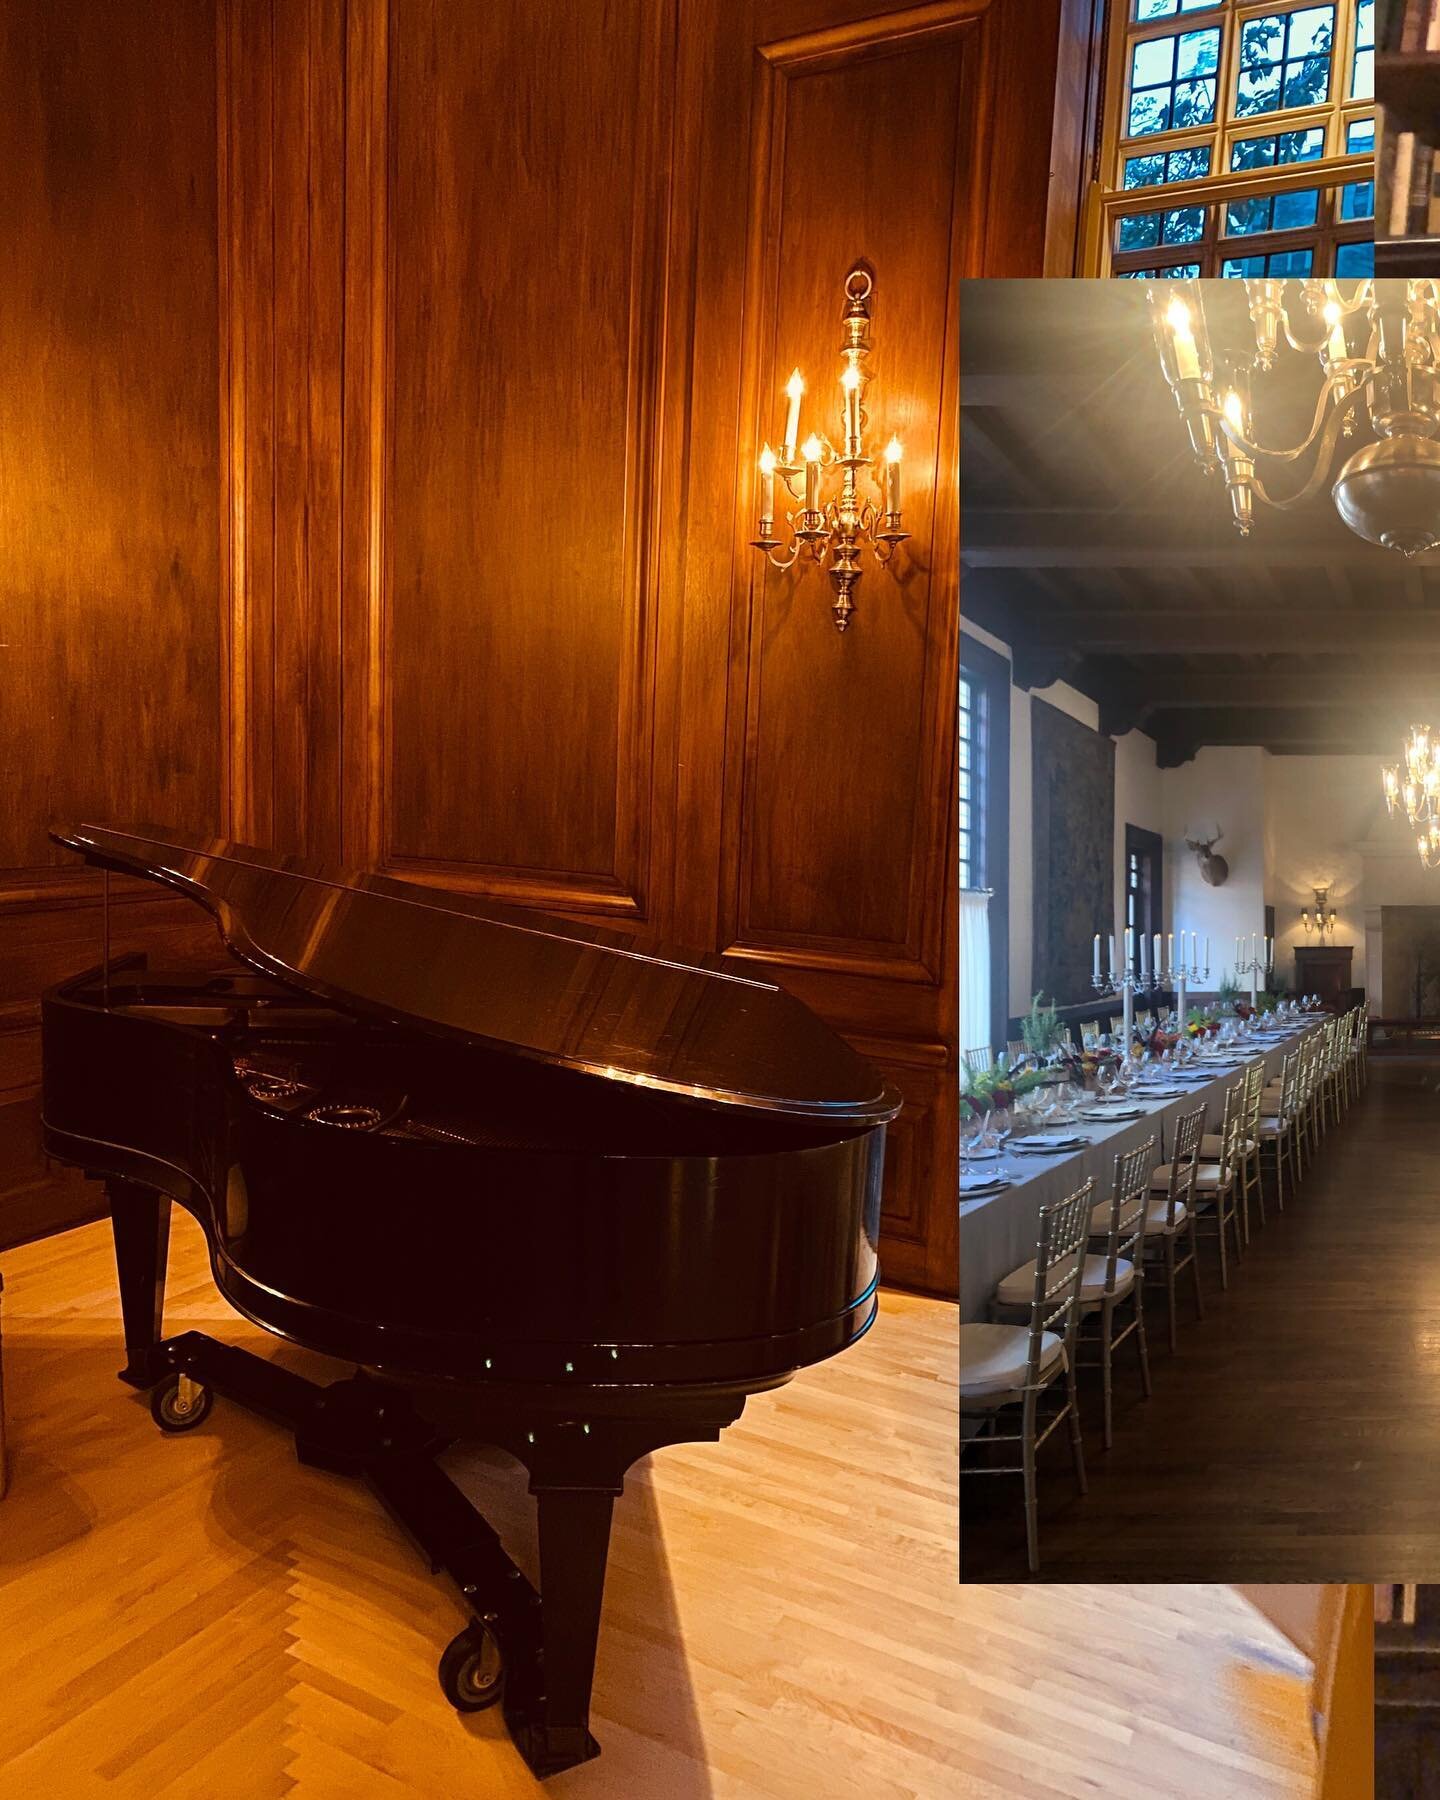 The Racquet Club of Chicago is a dream venue 😍 They have four beautiful pianos on site (yes four!!) and we were lucky enough to utilize one last Friday! 🎹

This couple had a pop trio play for their rehearsal dinner! We loved helping them get the pa